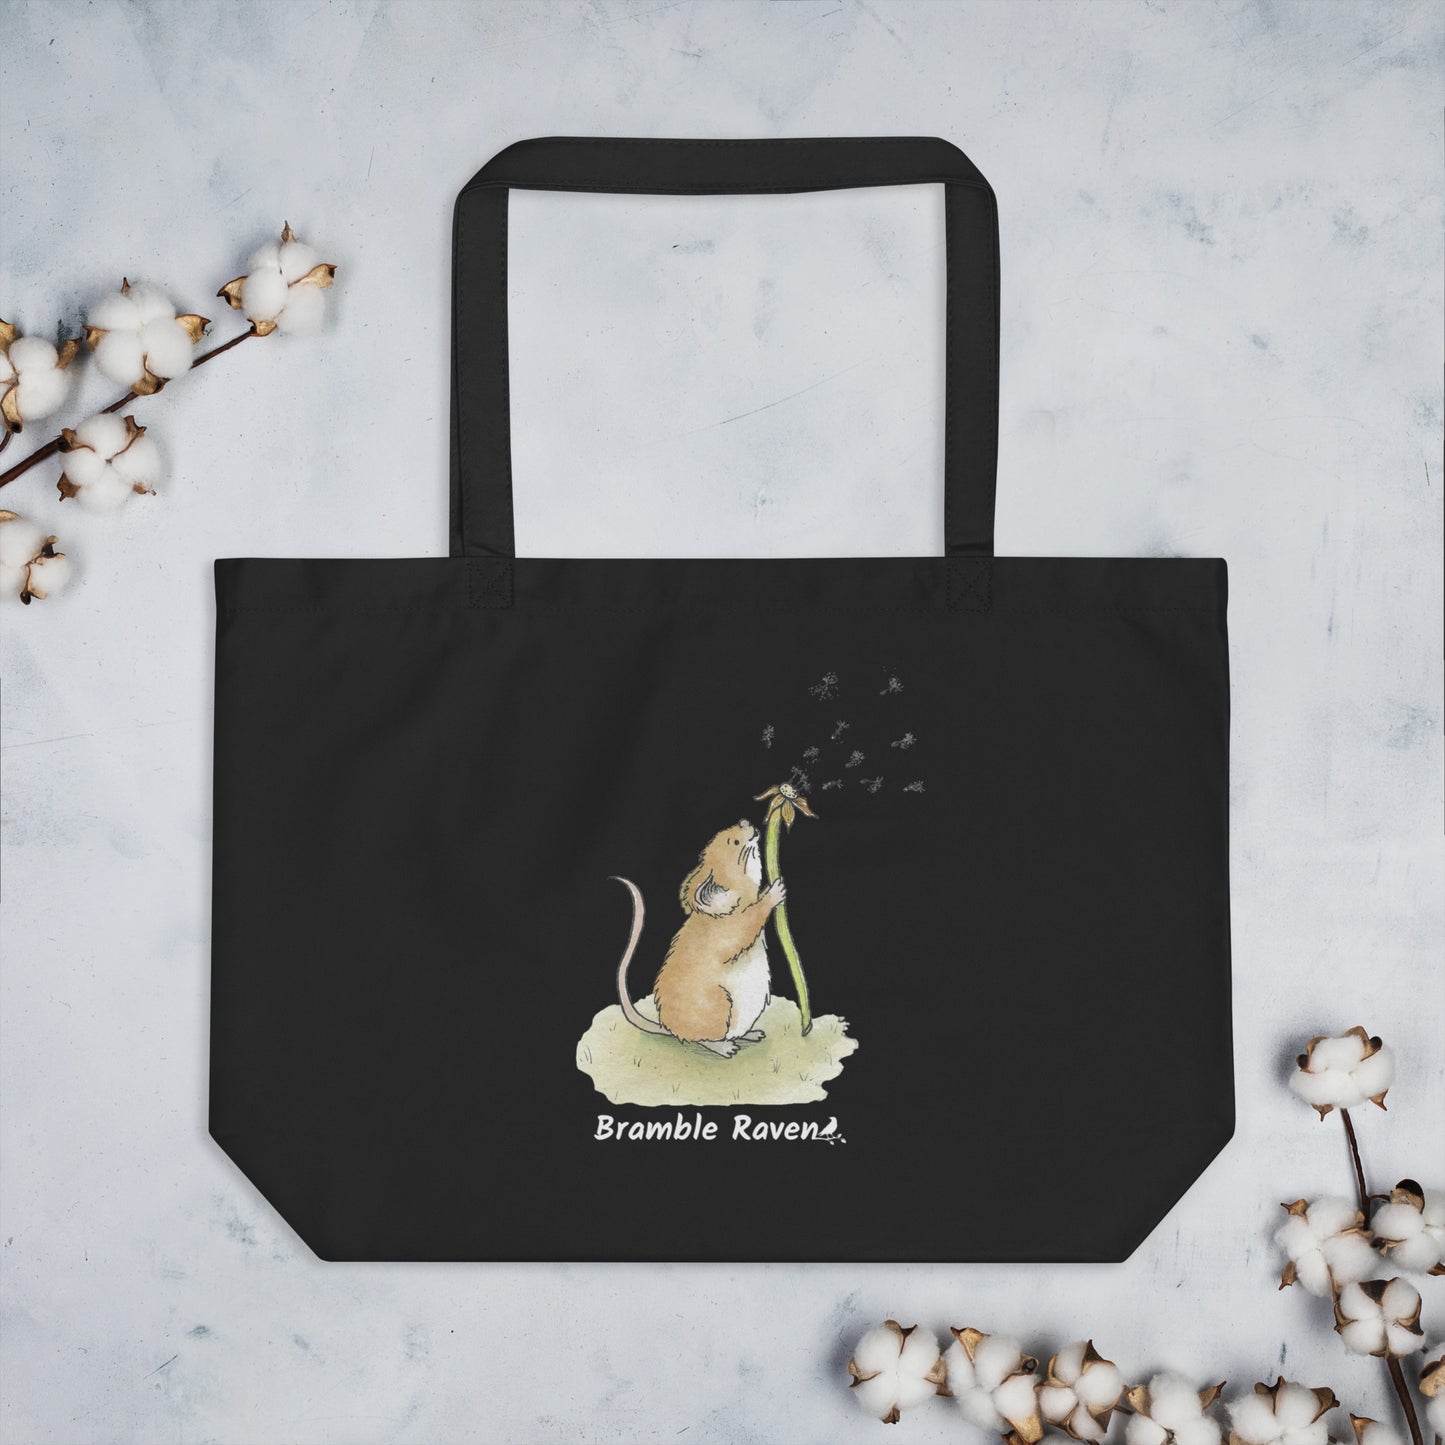 Original watercolor Dandelion wish design of a cute mouse blowing dandelion seeds. Printed on large black colored eco tote. 20 by 14 by 5 inches. Shown on tabletop with cotton plant accents.